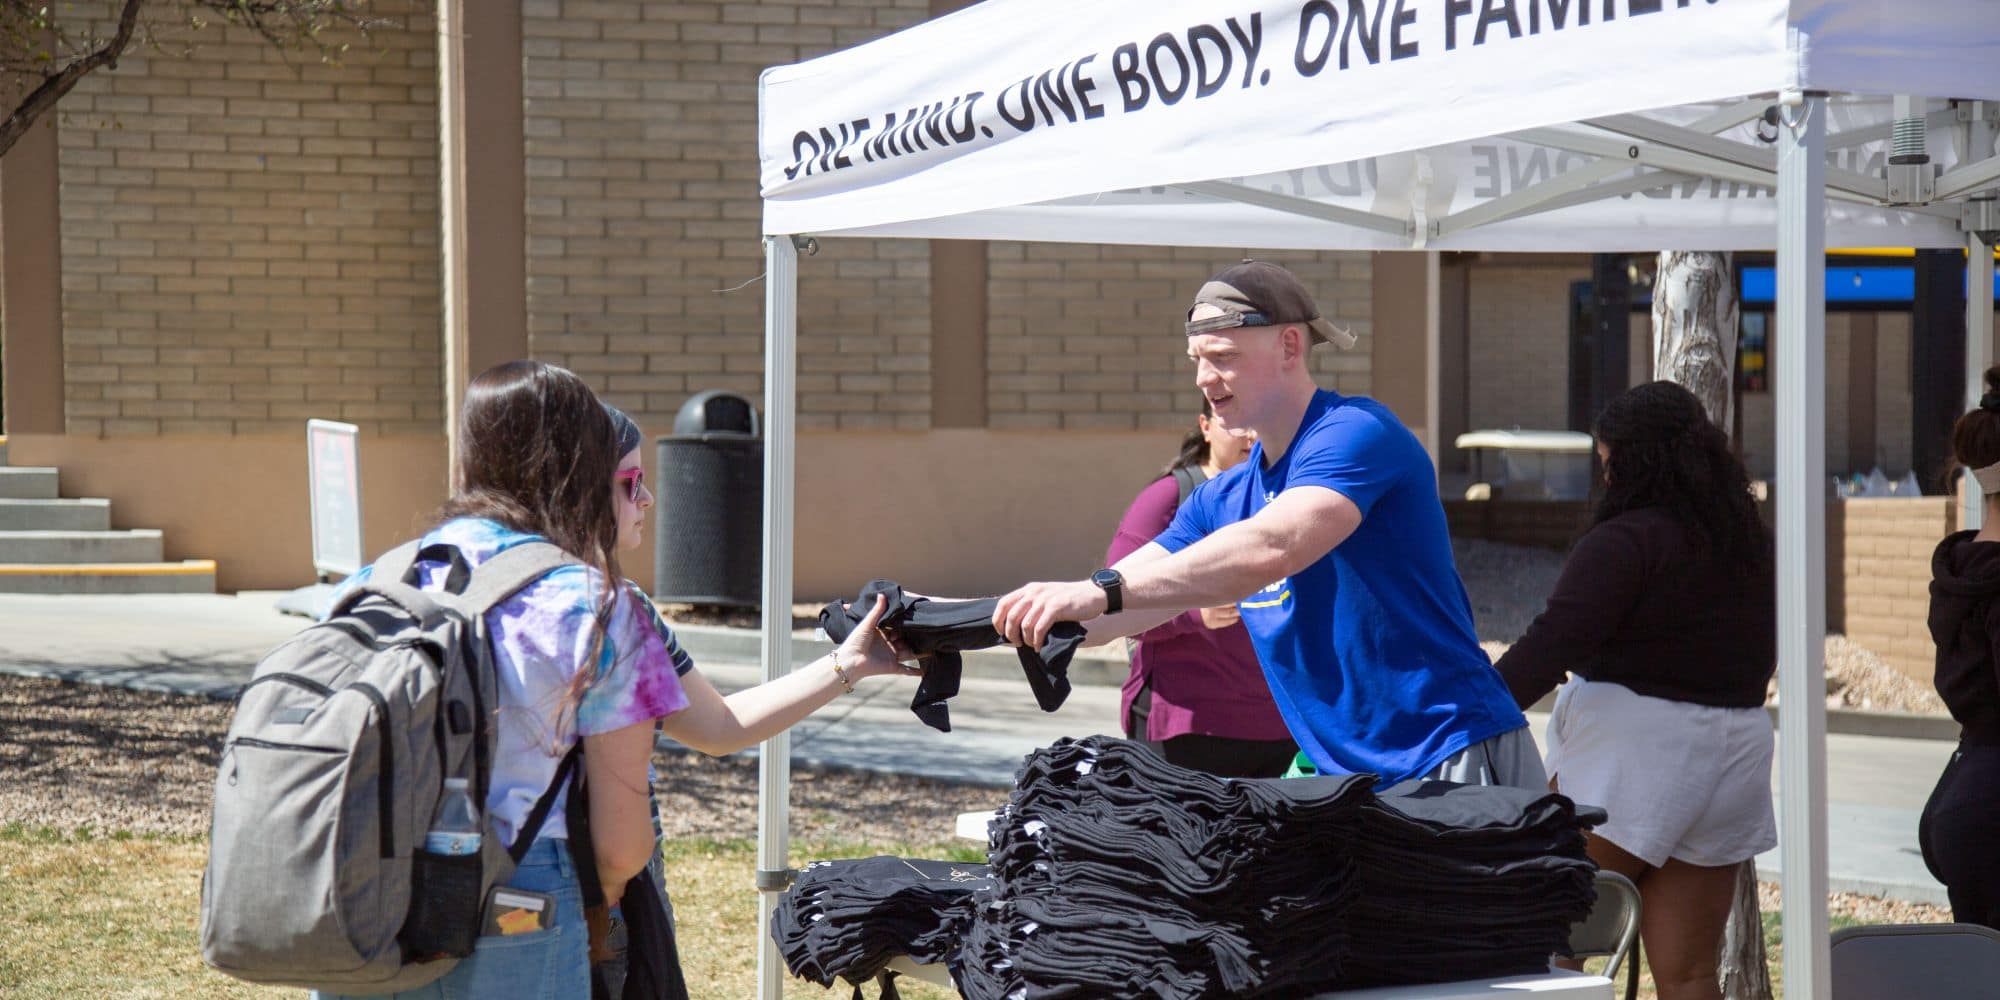 One of the newest projects introduced by the Student Government Association at the Prescott Campus is the Compassion Initiative, which aims to encourage diversity and inclusivity by bringing students together to share their unique perspectives and experiences. (Photo: Embry-Riddle)